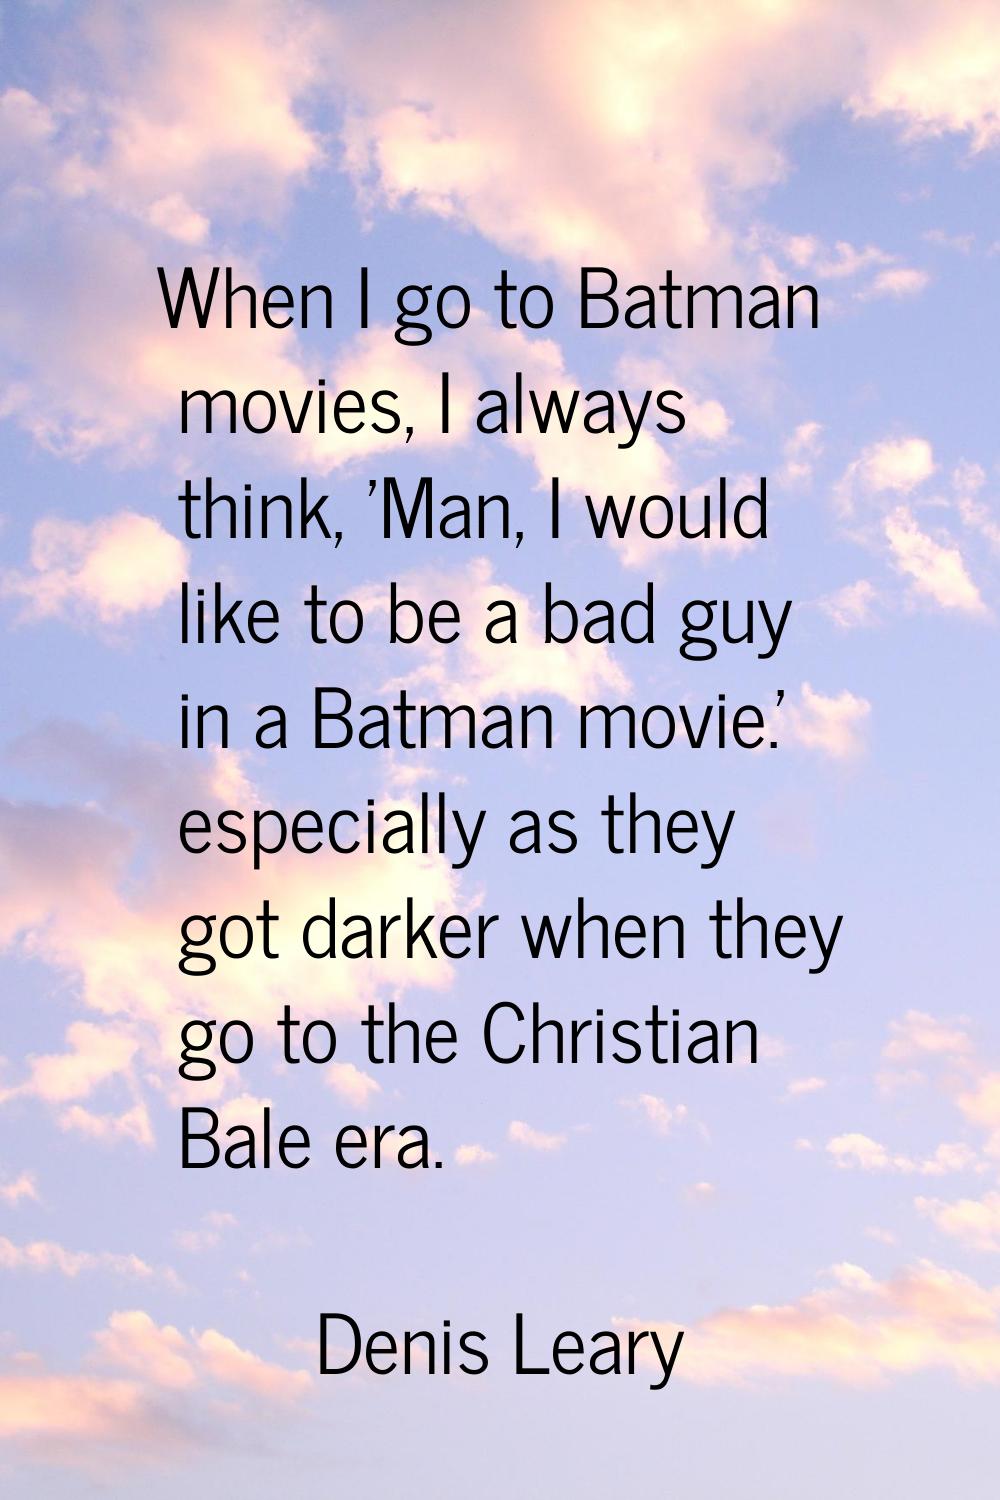 When I go to Batman movies, I always think, 'Man, I would like to be a bad guy in a Batman movie.' 